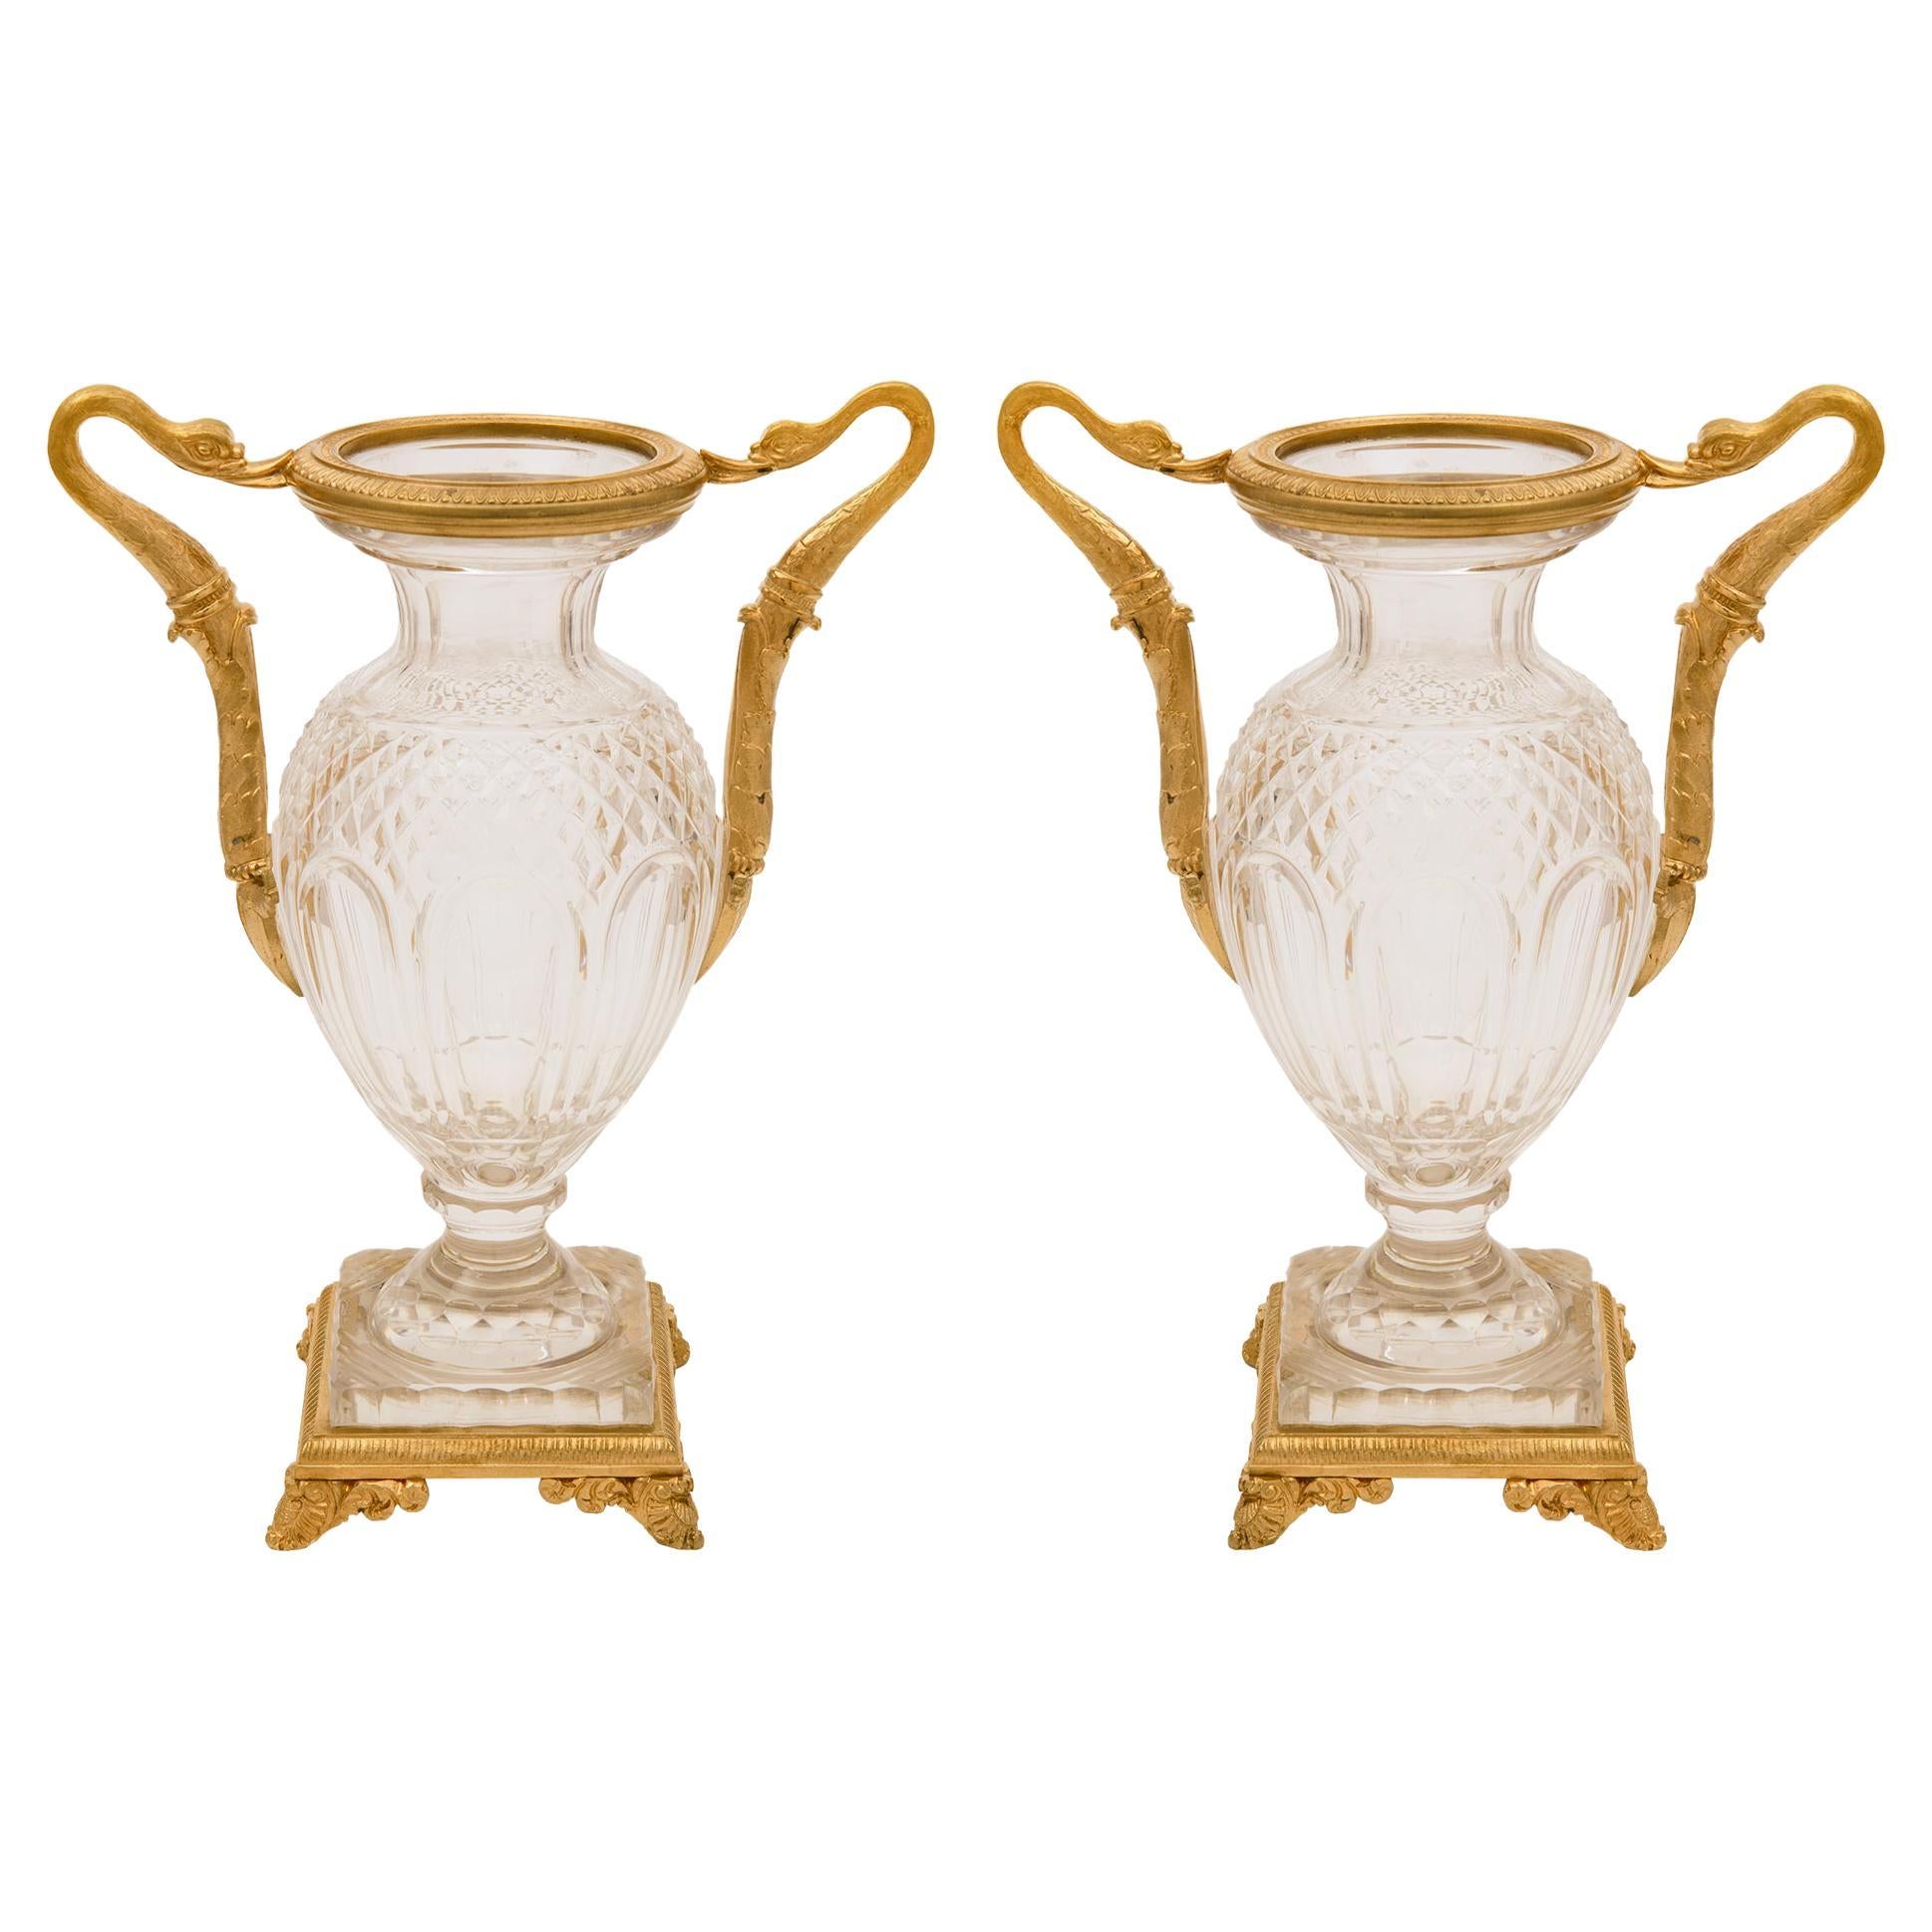 Pair of French 19th Century Neoclassical Style Ormolu and Crystal Vases